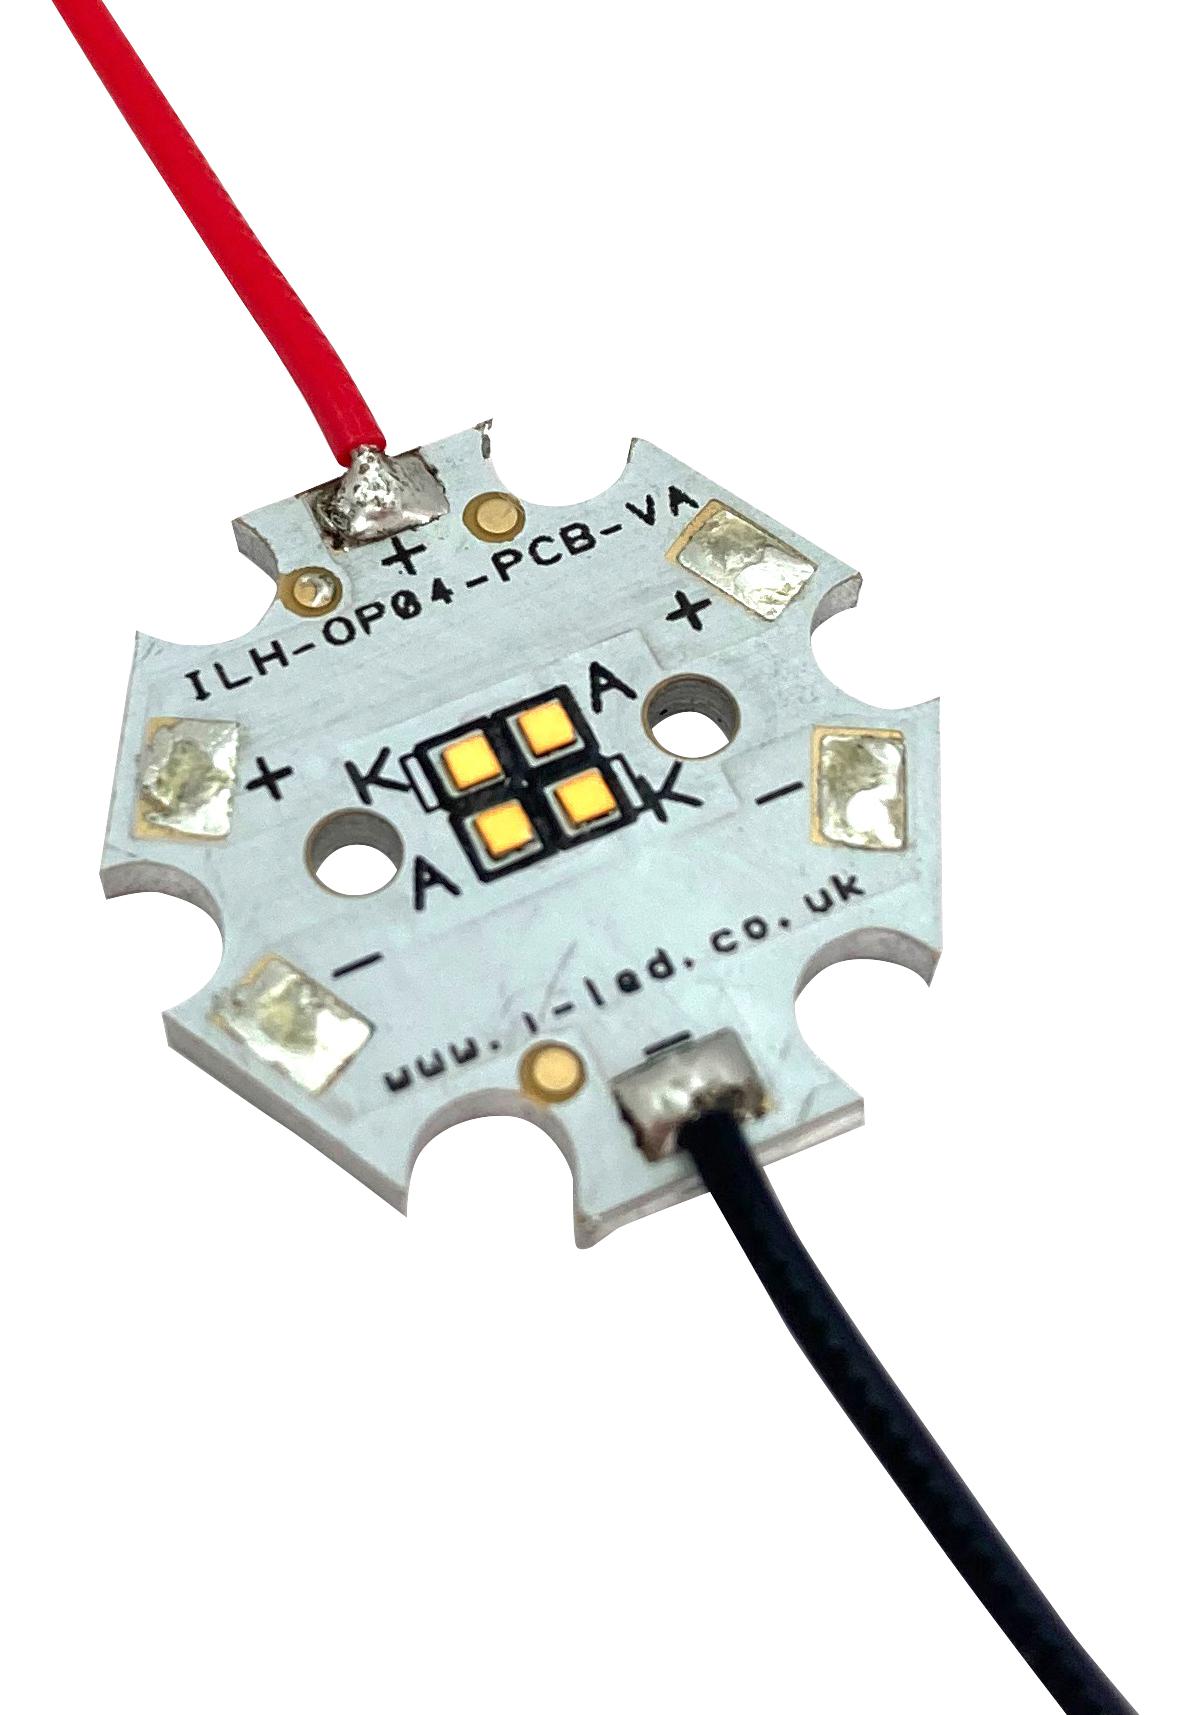 Intelligent Led Solutions Ilh-Op04-Wh90-Sc221-Wir200. Led Module, White, 340Lm, 5000K, Star